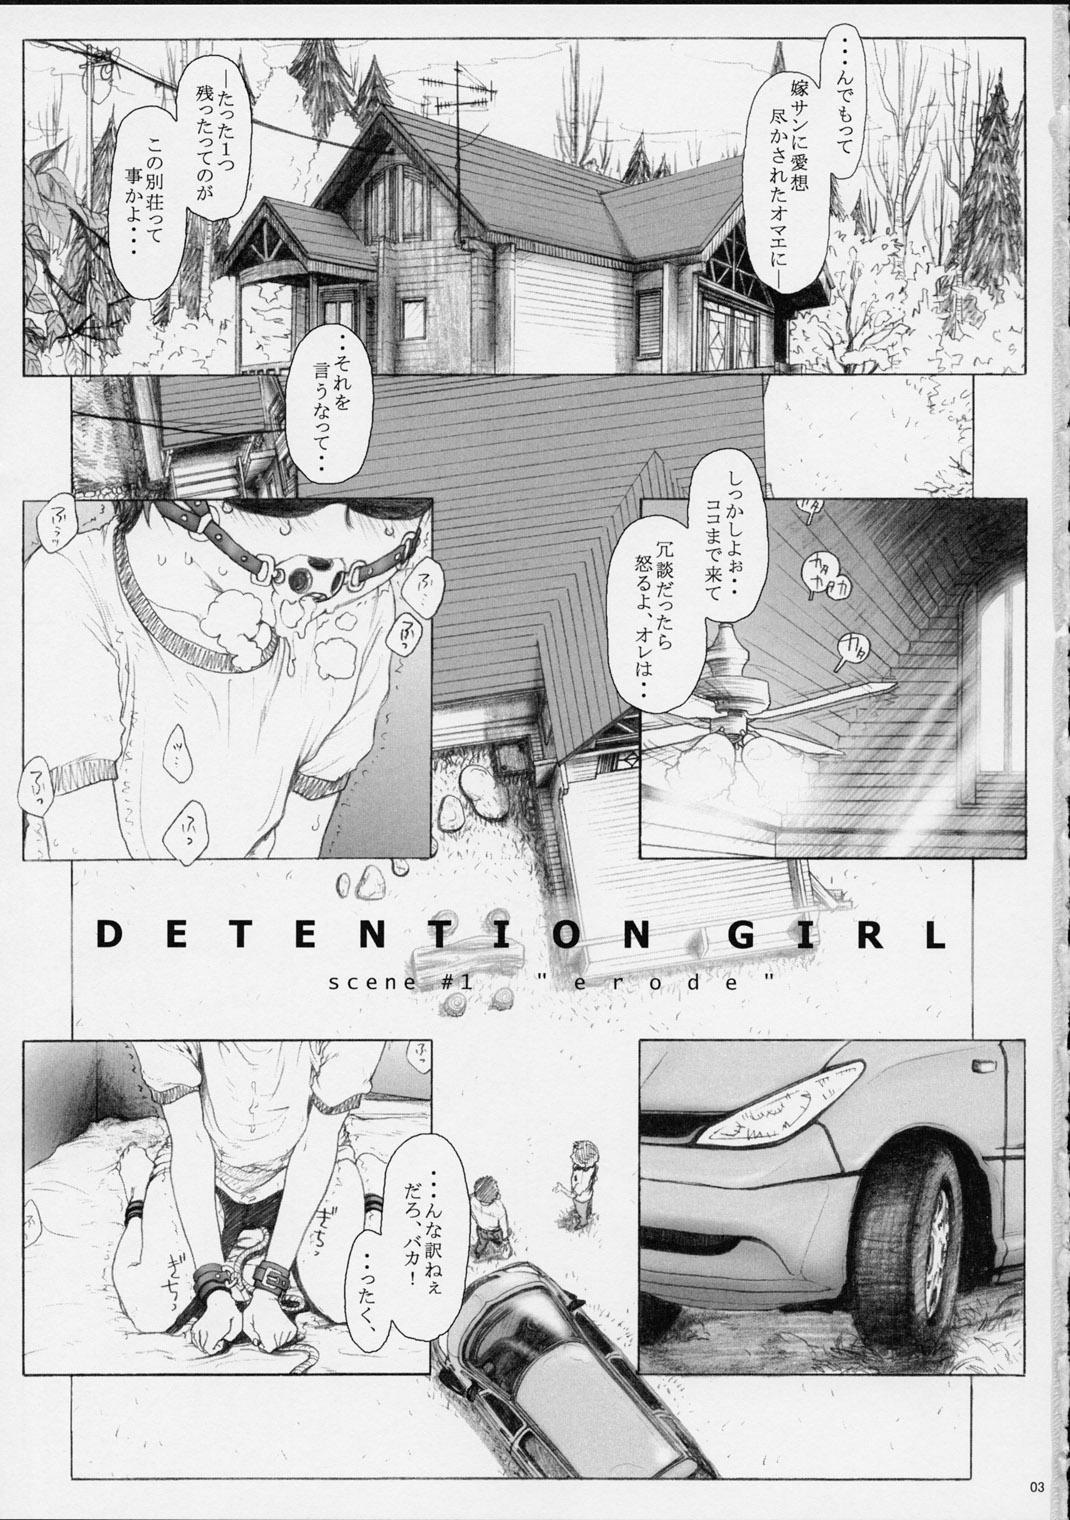 Gayclips Koukin Shoujo 1 - Detention Girl 1 All - Page 2